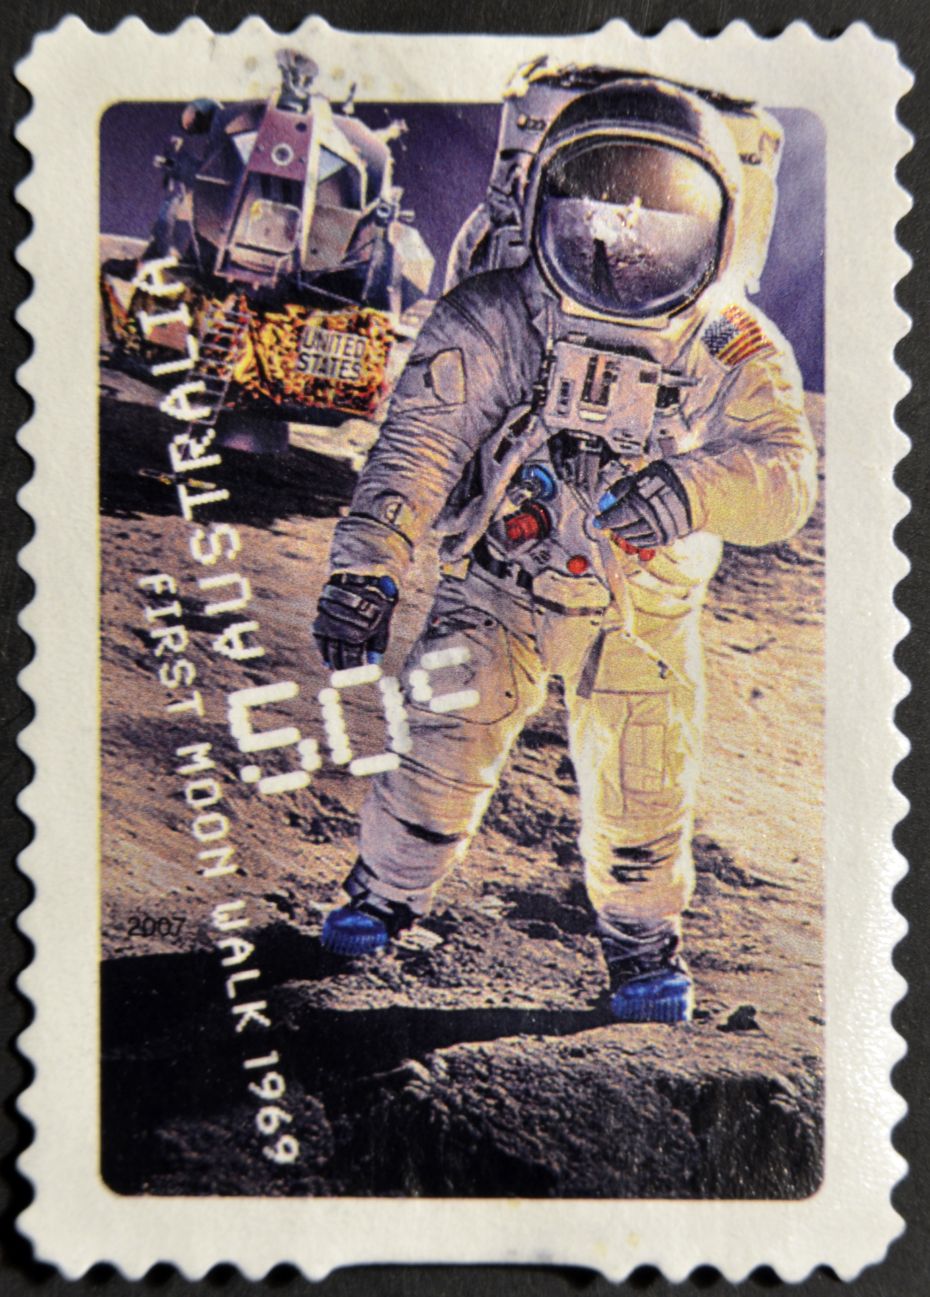 _moon_neil_armstrong_stamp_530_739